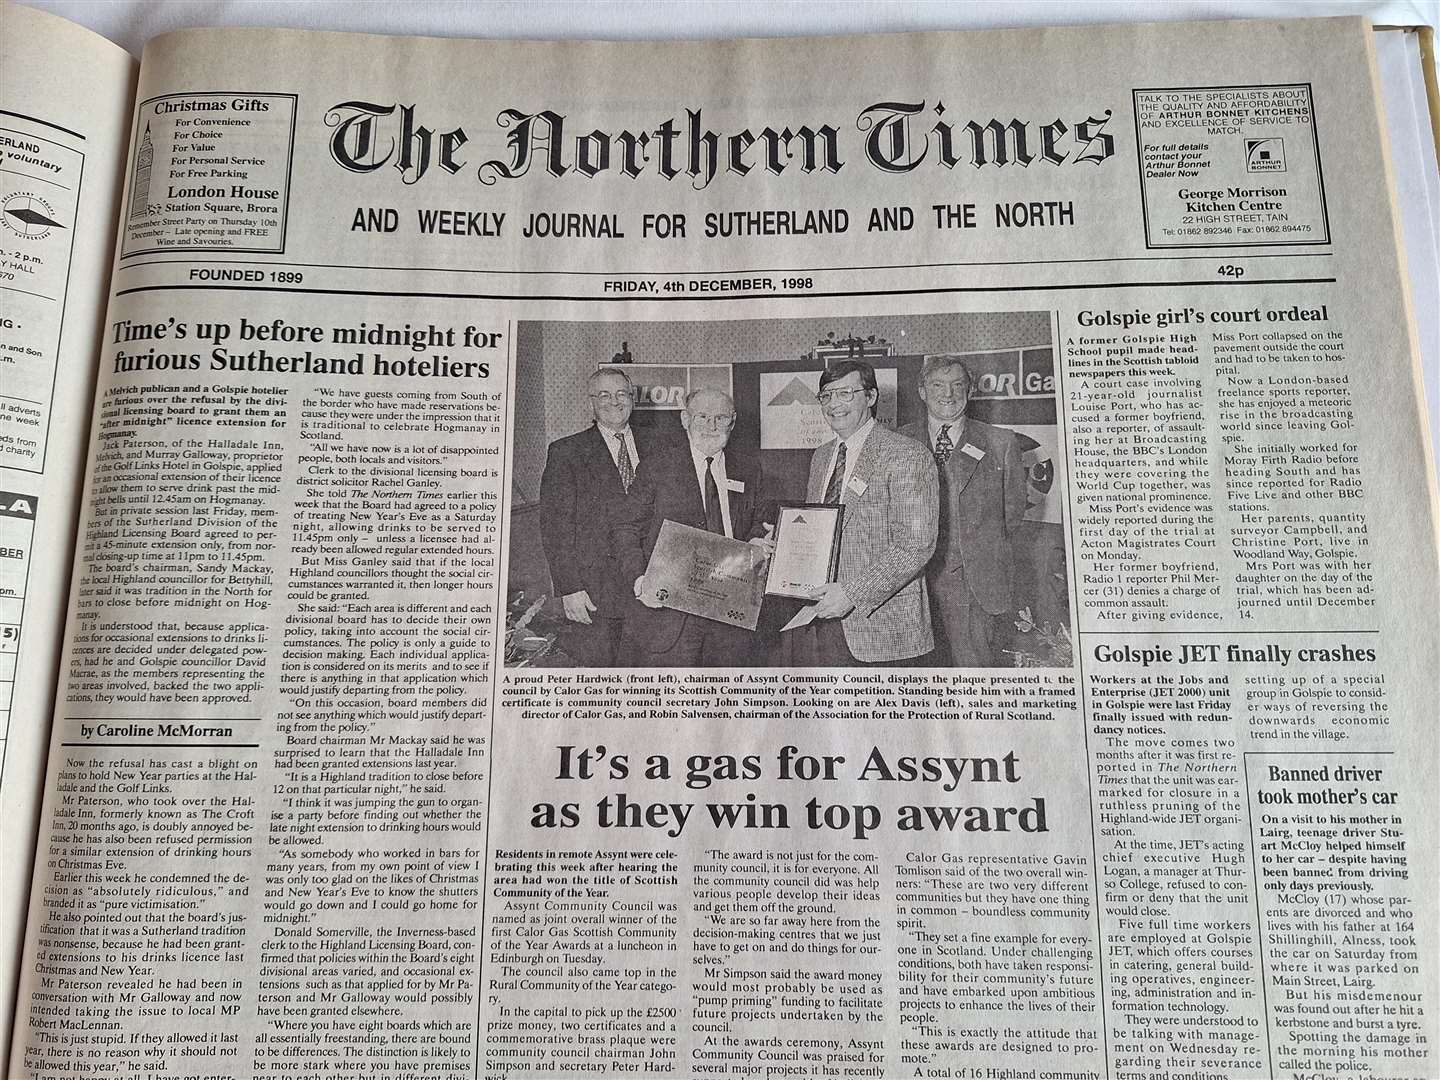 The edition of December 4, 1998.